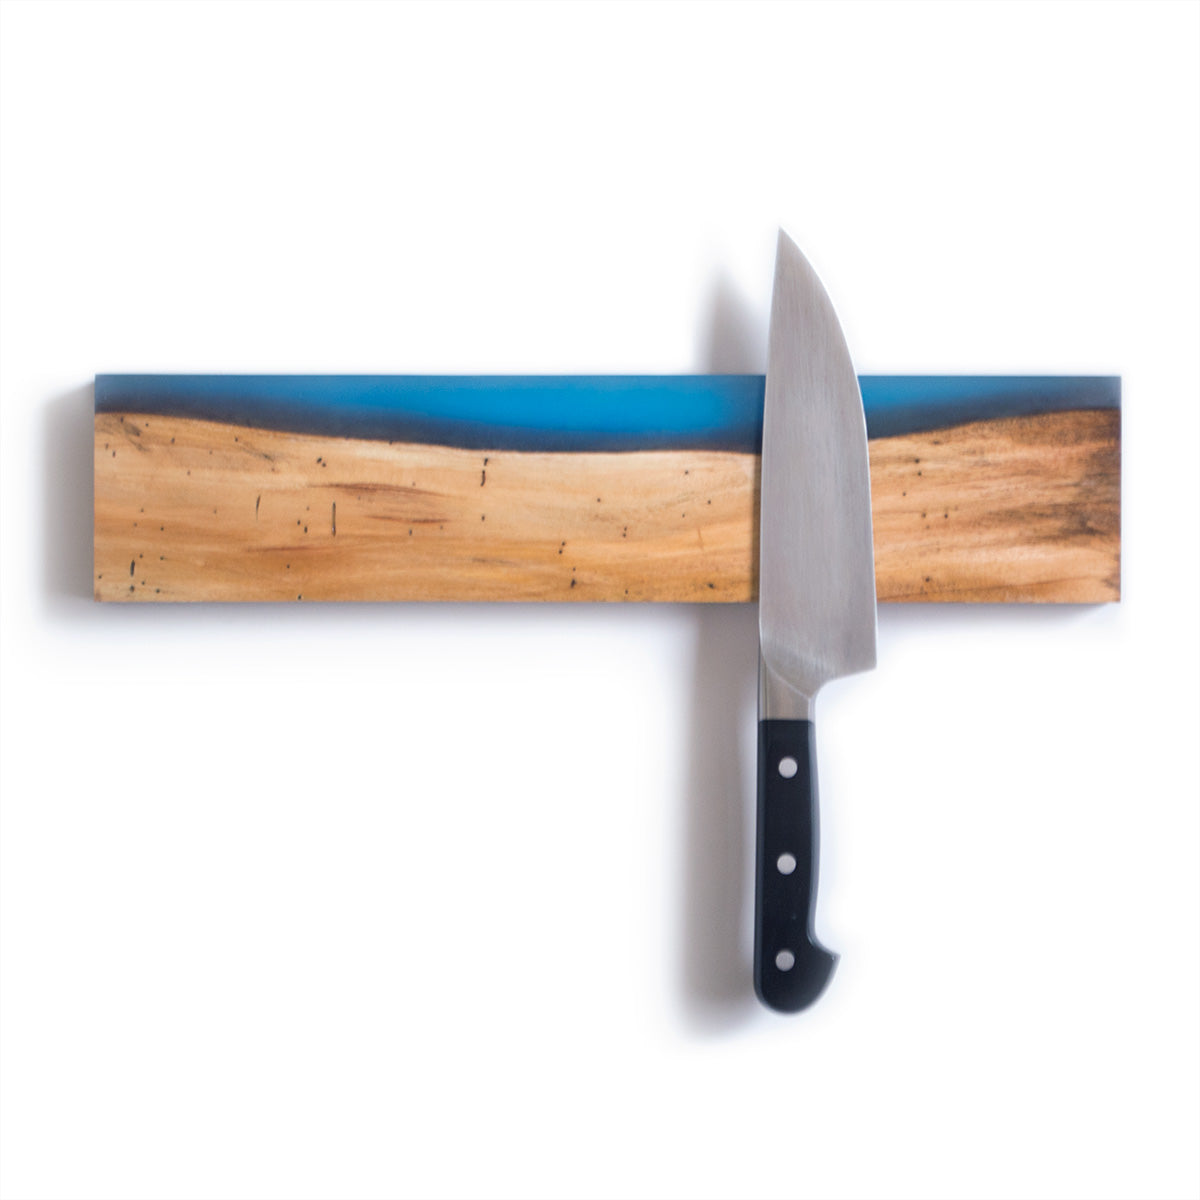 wood and epoxy magnetic knife holder made from salvaged mahogany wood and frosted blue epoxy resin